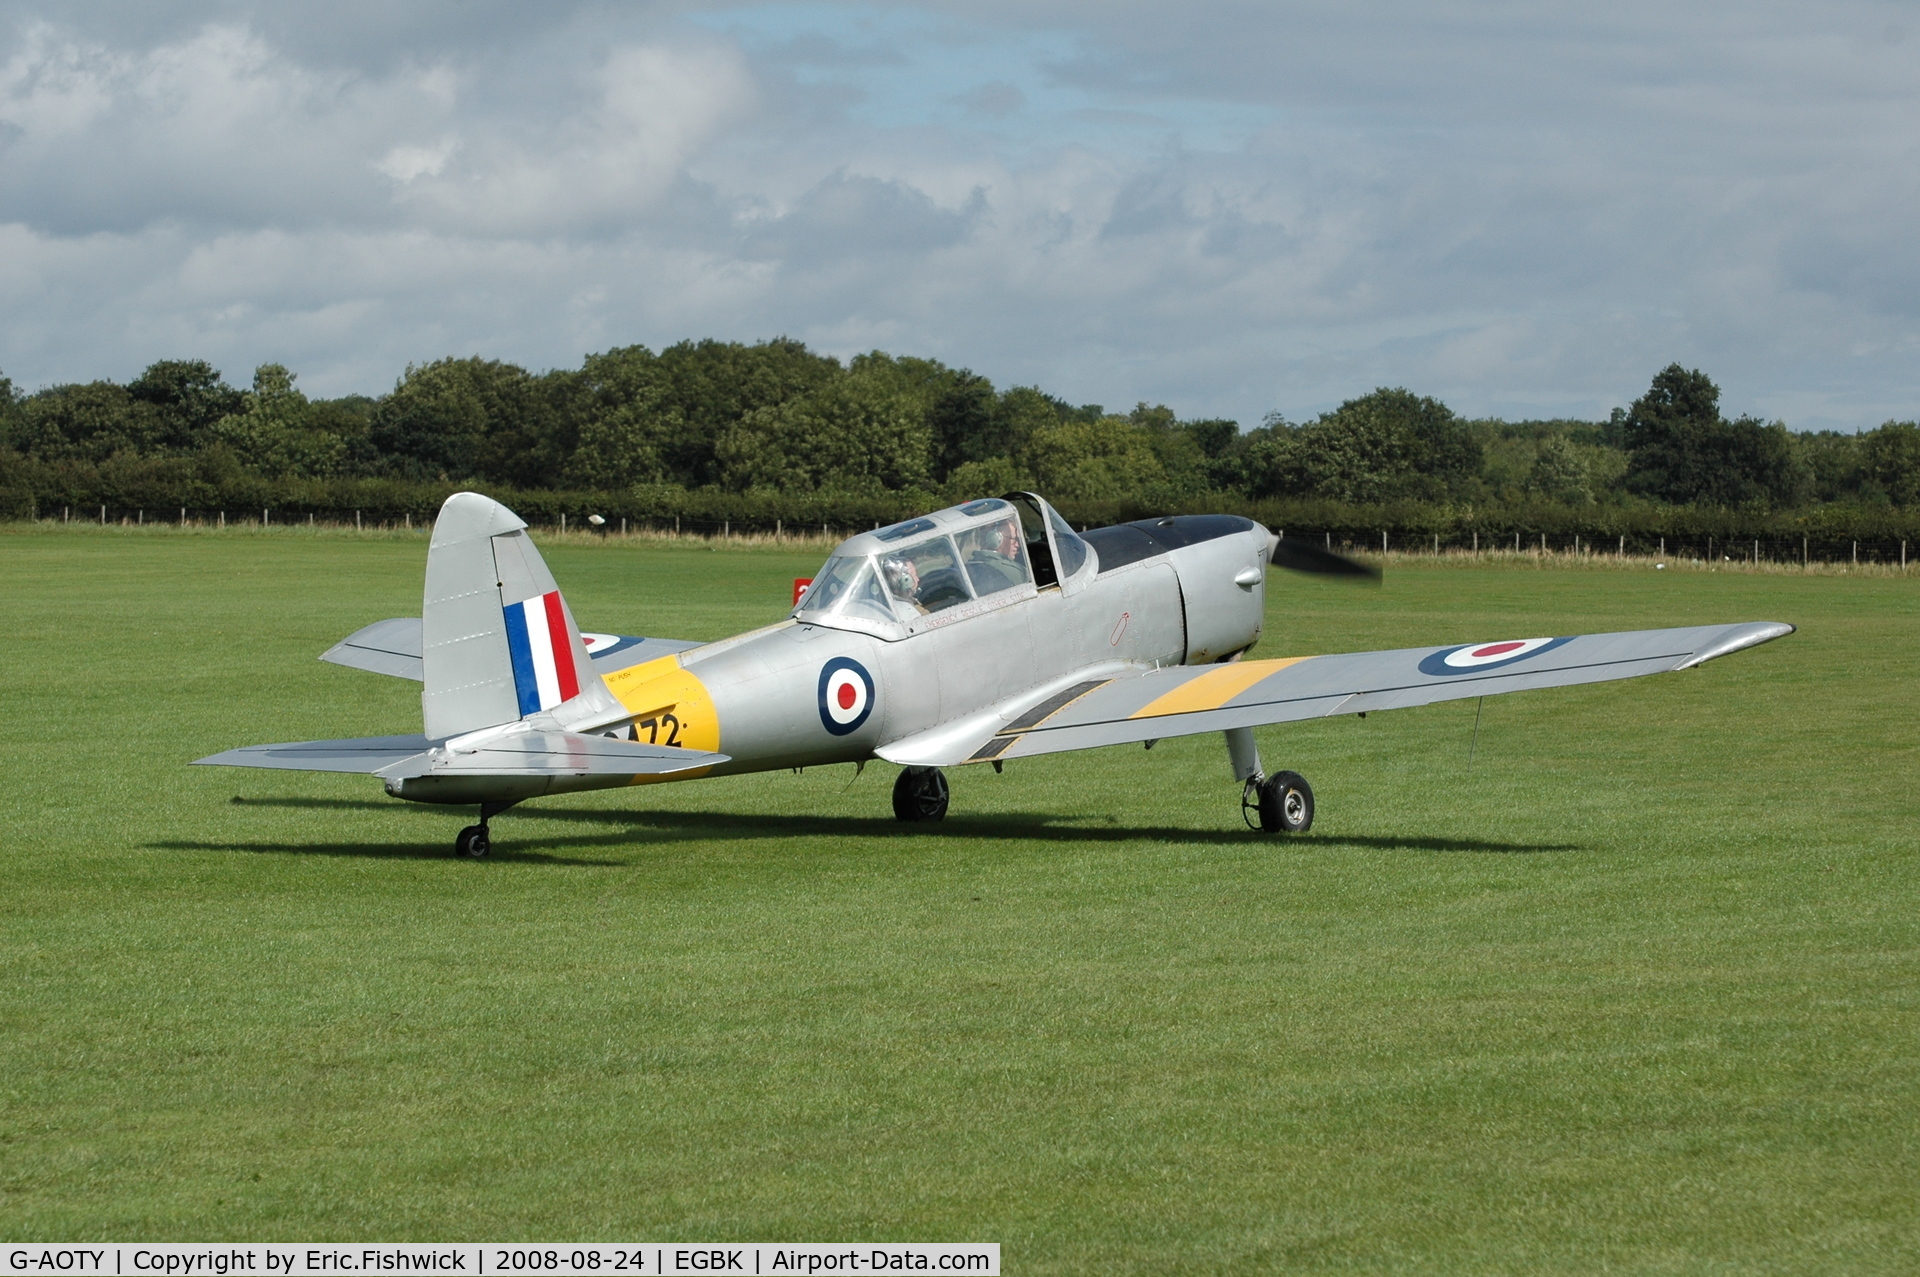 G-AOTY, 1951 De Havilland DHC-1 Chipmunk 22A C/N C1/0522, 2. WG472 at Sywell Airshow 24 Aug 2008